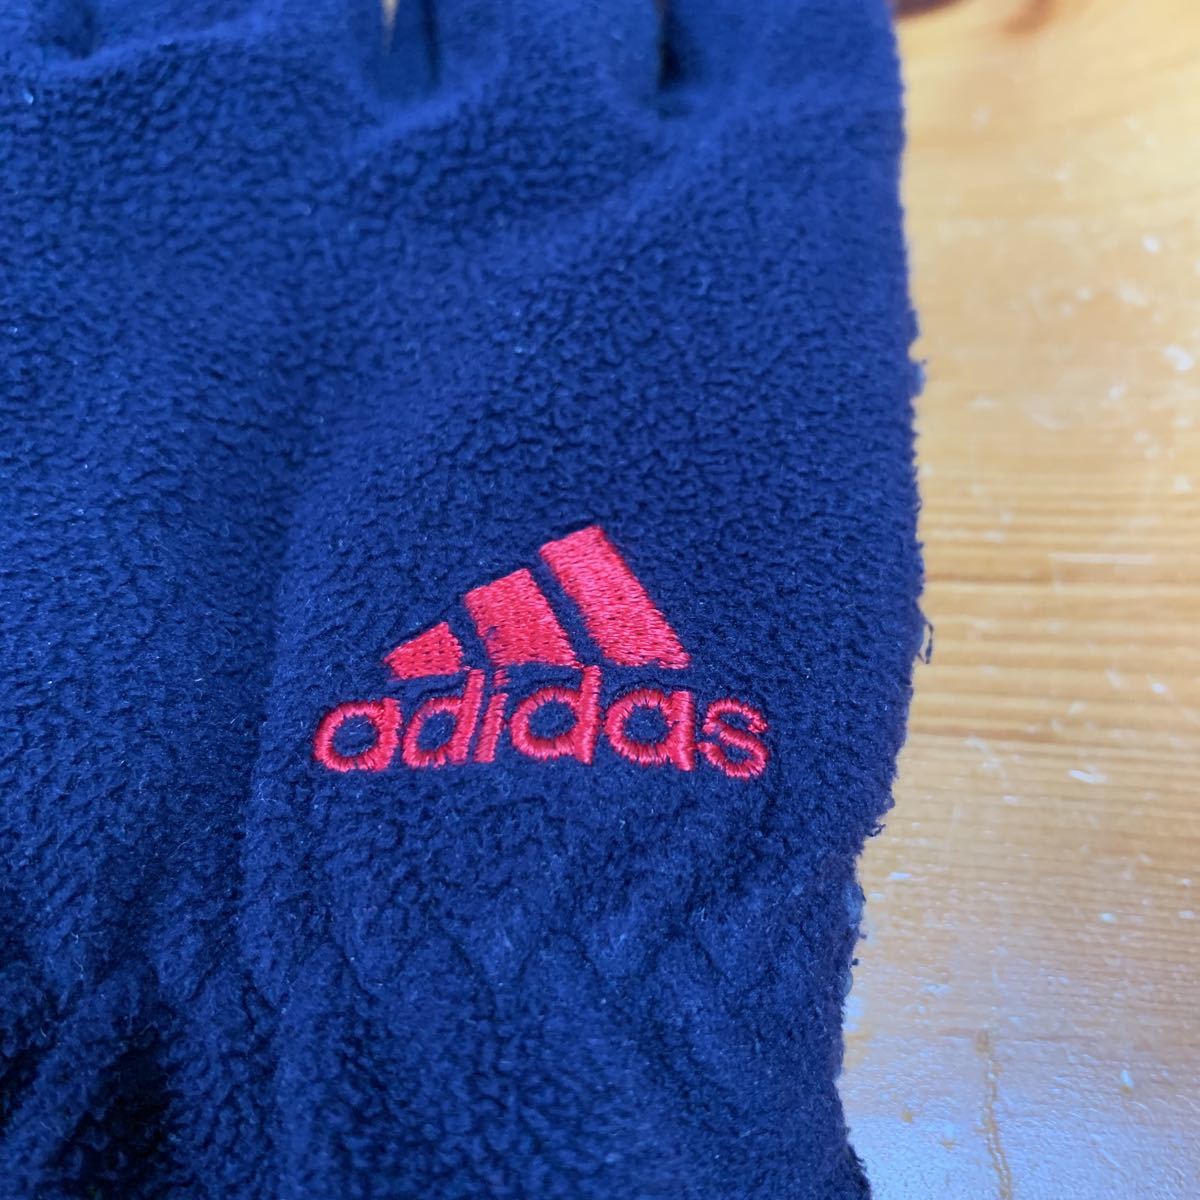 adidas Adidas for children gloves gloves slip prevention attaching ( half minute not. ) Kids for children red Logo embroidery navy navy blue color name chronicle have secondhand goods use item free shipping 